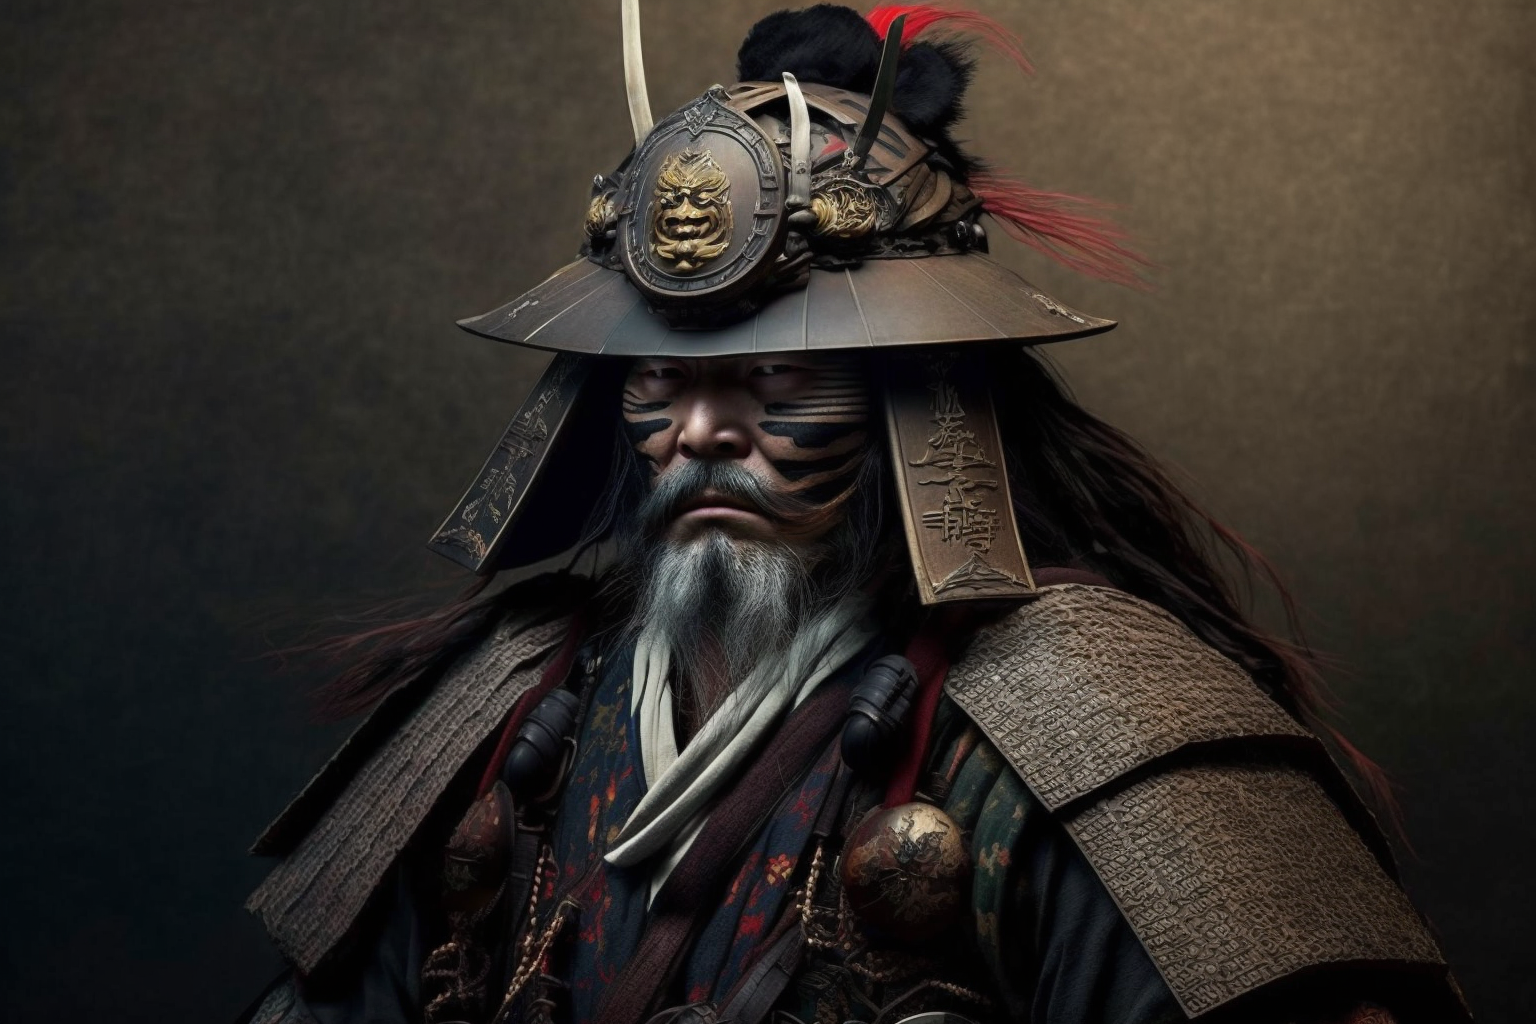 The Warriors of Honor: A Look into the History of the Samurai